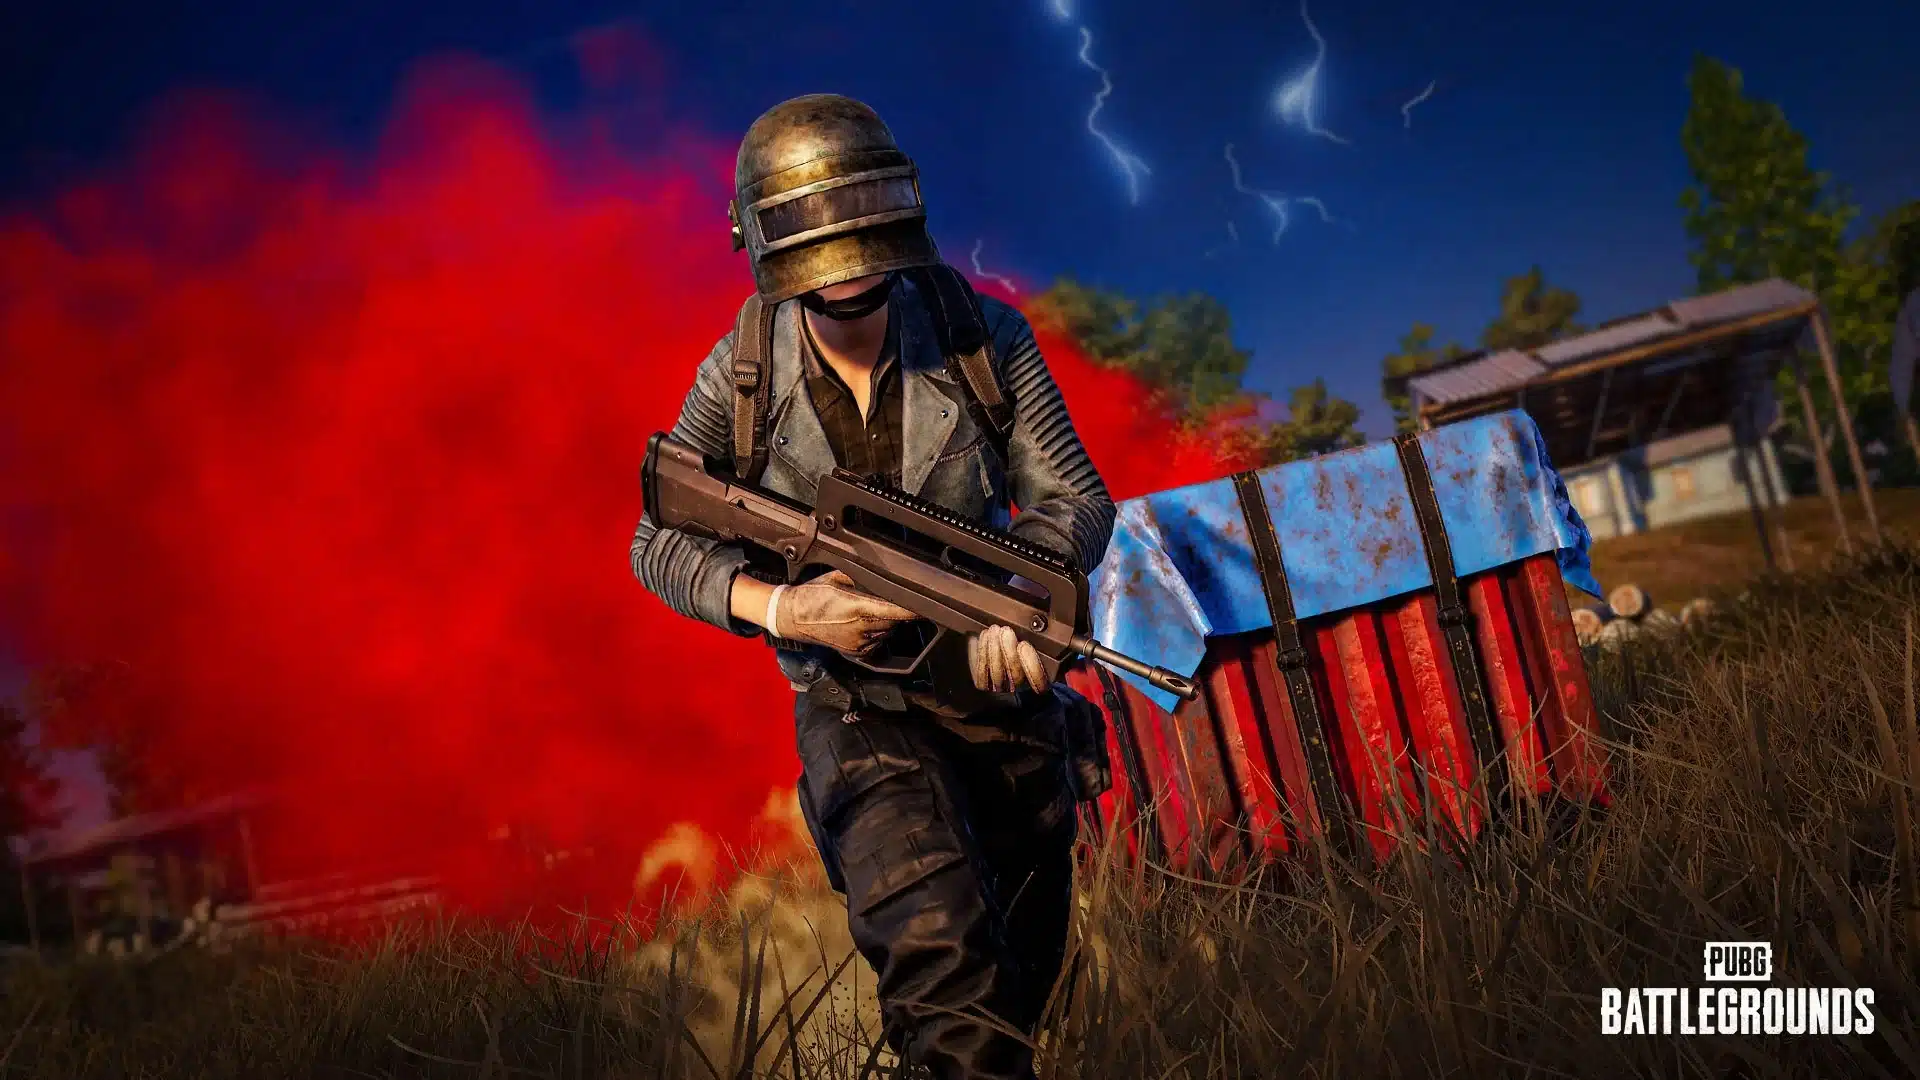 PUBG Update 2.32 Patch notes March 22